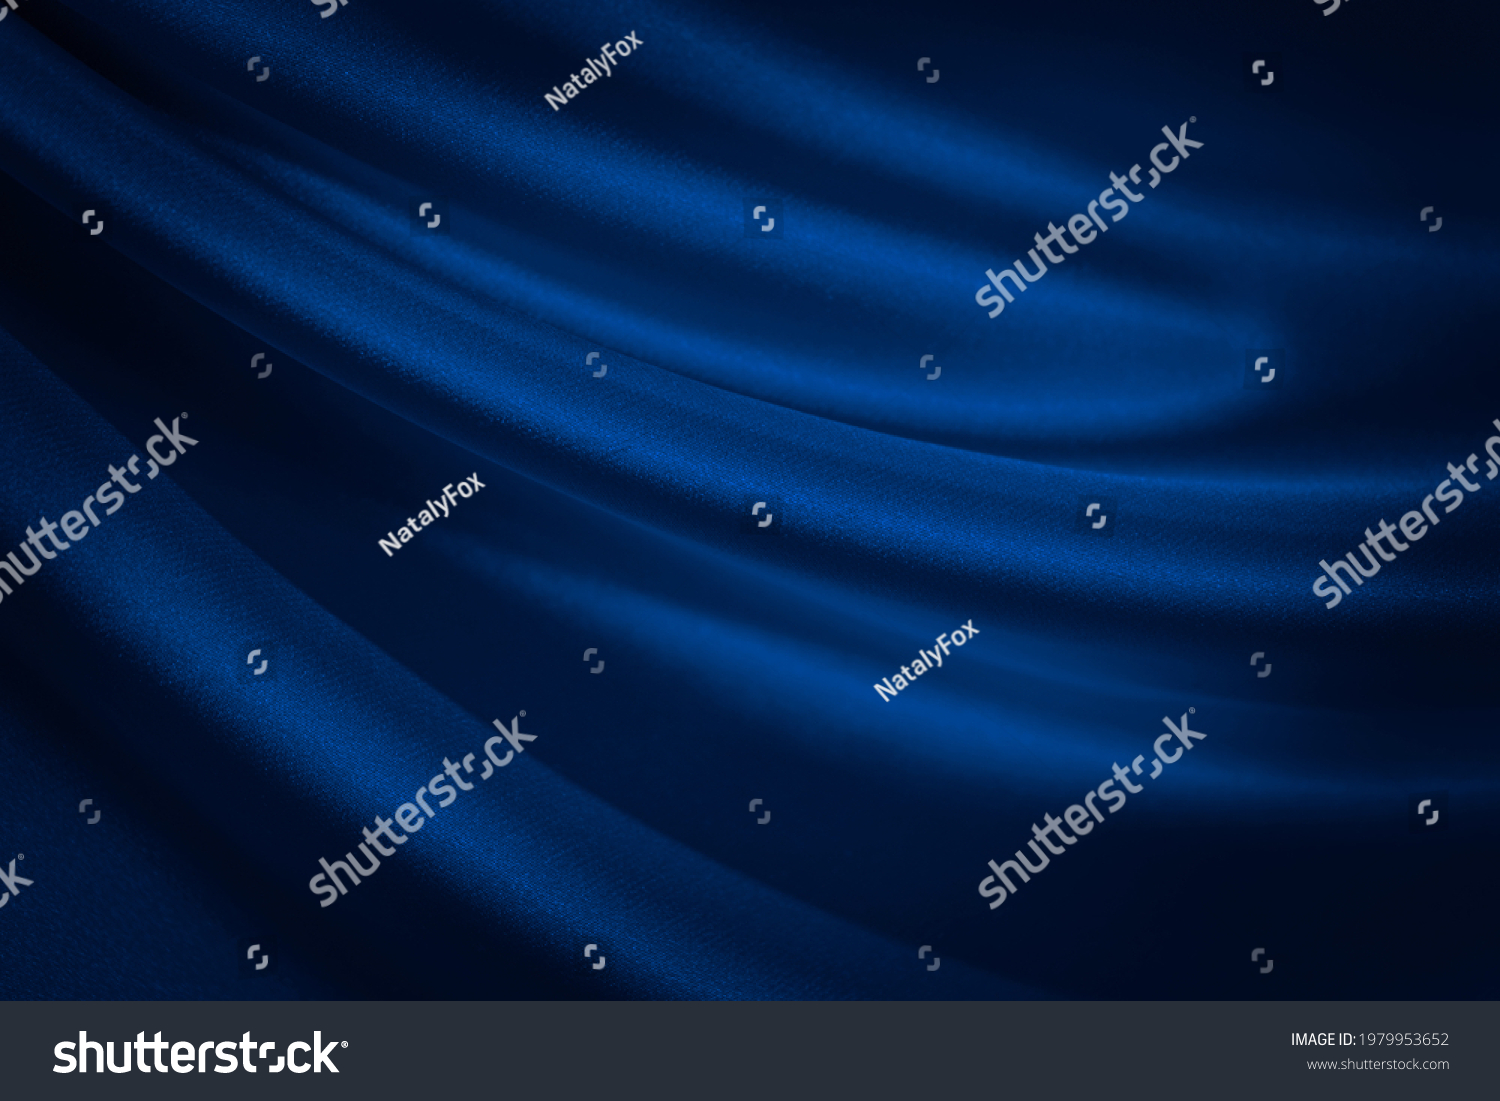  Black blue abstract background. Dark blue silk satin texture background. Shiny fabric with wavy soft pleats. Dark blue elegant background with copy space for your design. Liquid wave effect.          #1979953652